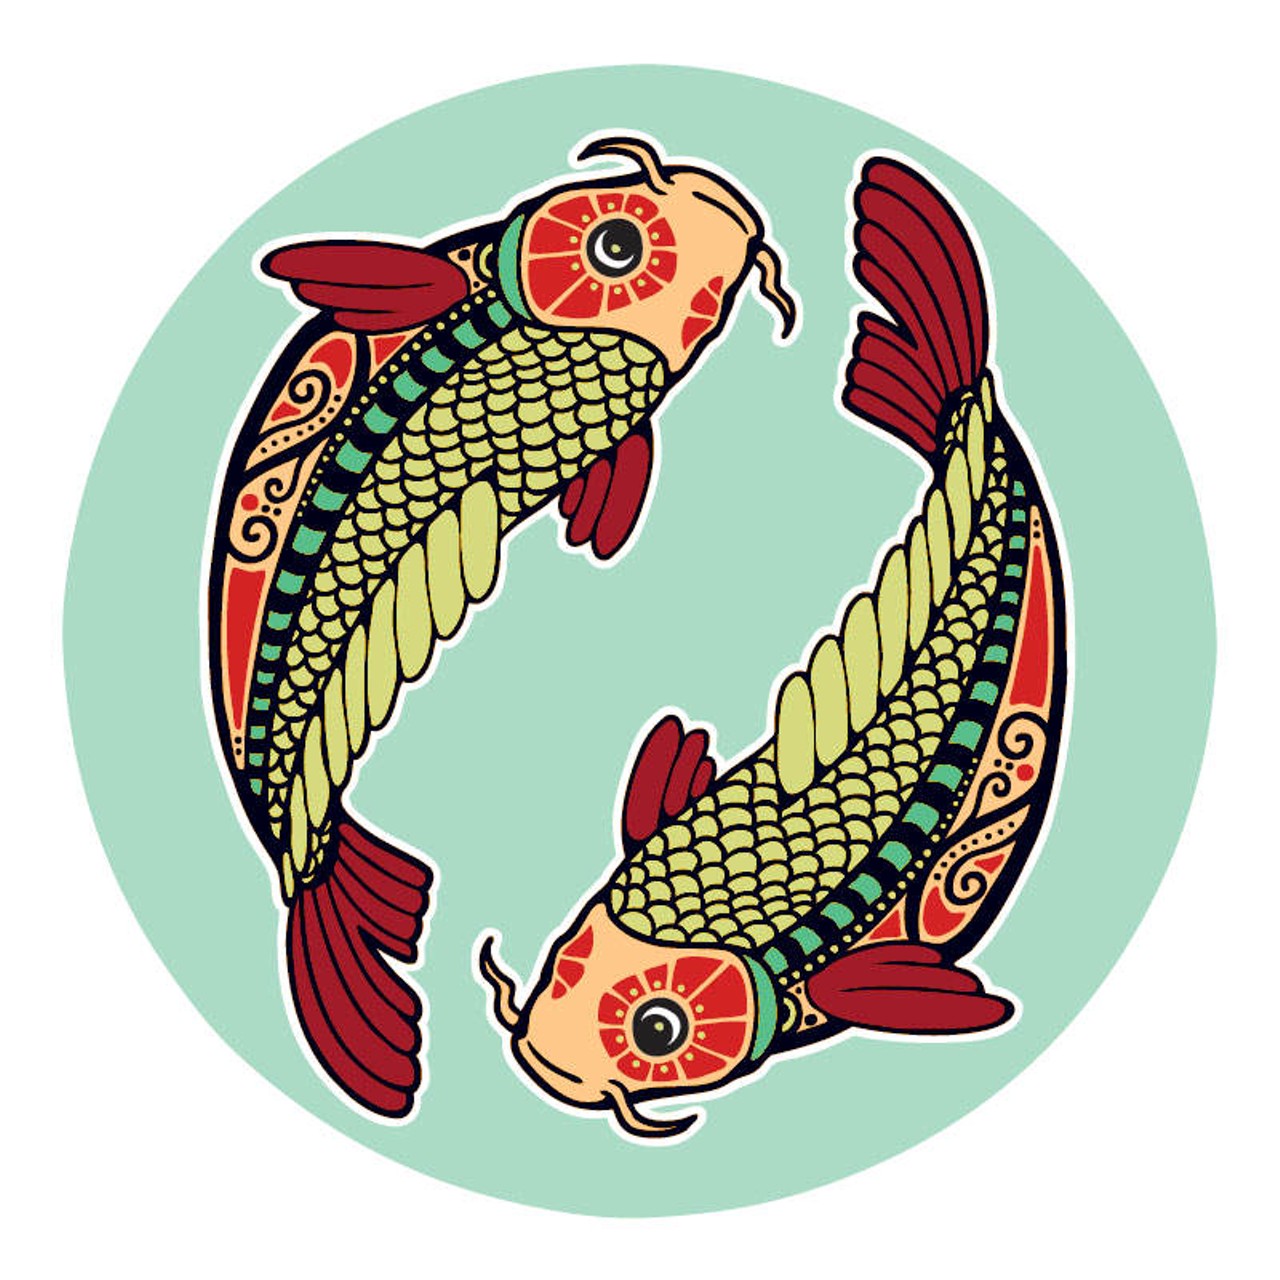 PISCES (Feb. 21-March 20): 
Waiting for everyone else to get it together, you&#146;re starting to wonder if you even want to be part of this deal any longer. You are so close to not caring. It&#146;s interesting to watch yourself go back and forth over what might be the right thing to do. In most situations, it works better when you look at what it&#146;s costing you and weigh that against what you&#146;re getting out of it. I don&#146;t know how it&#146;s working for you at the moment, but I&#146;m pretty sure you don&#146;t need this half as much as they do. Seen in that light, the deeper question is this: What do you really want out of this?